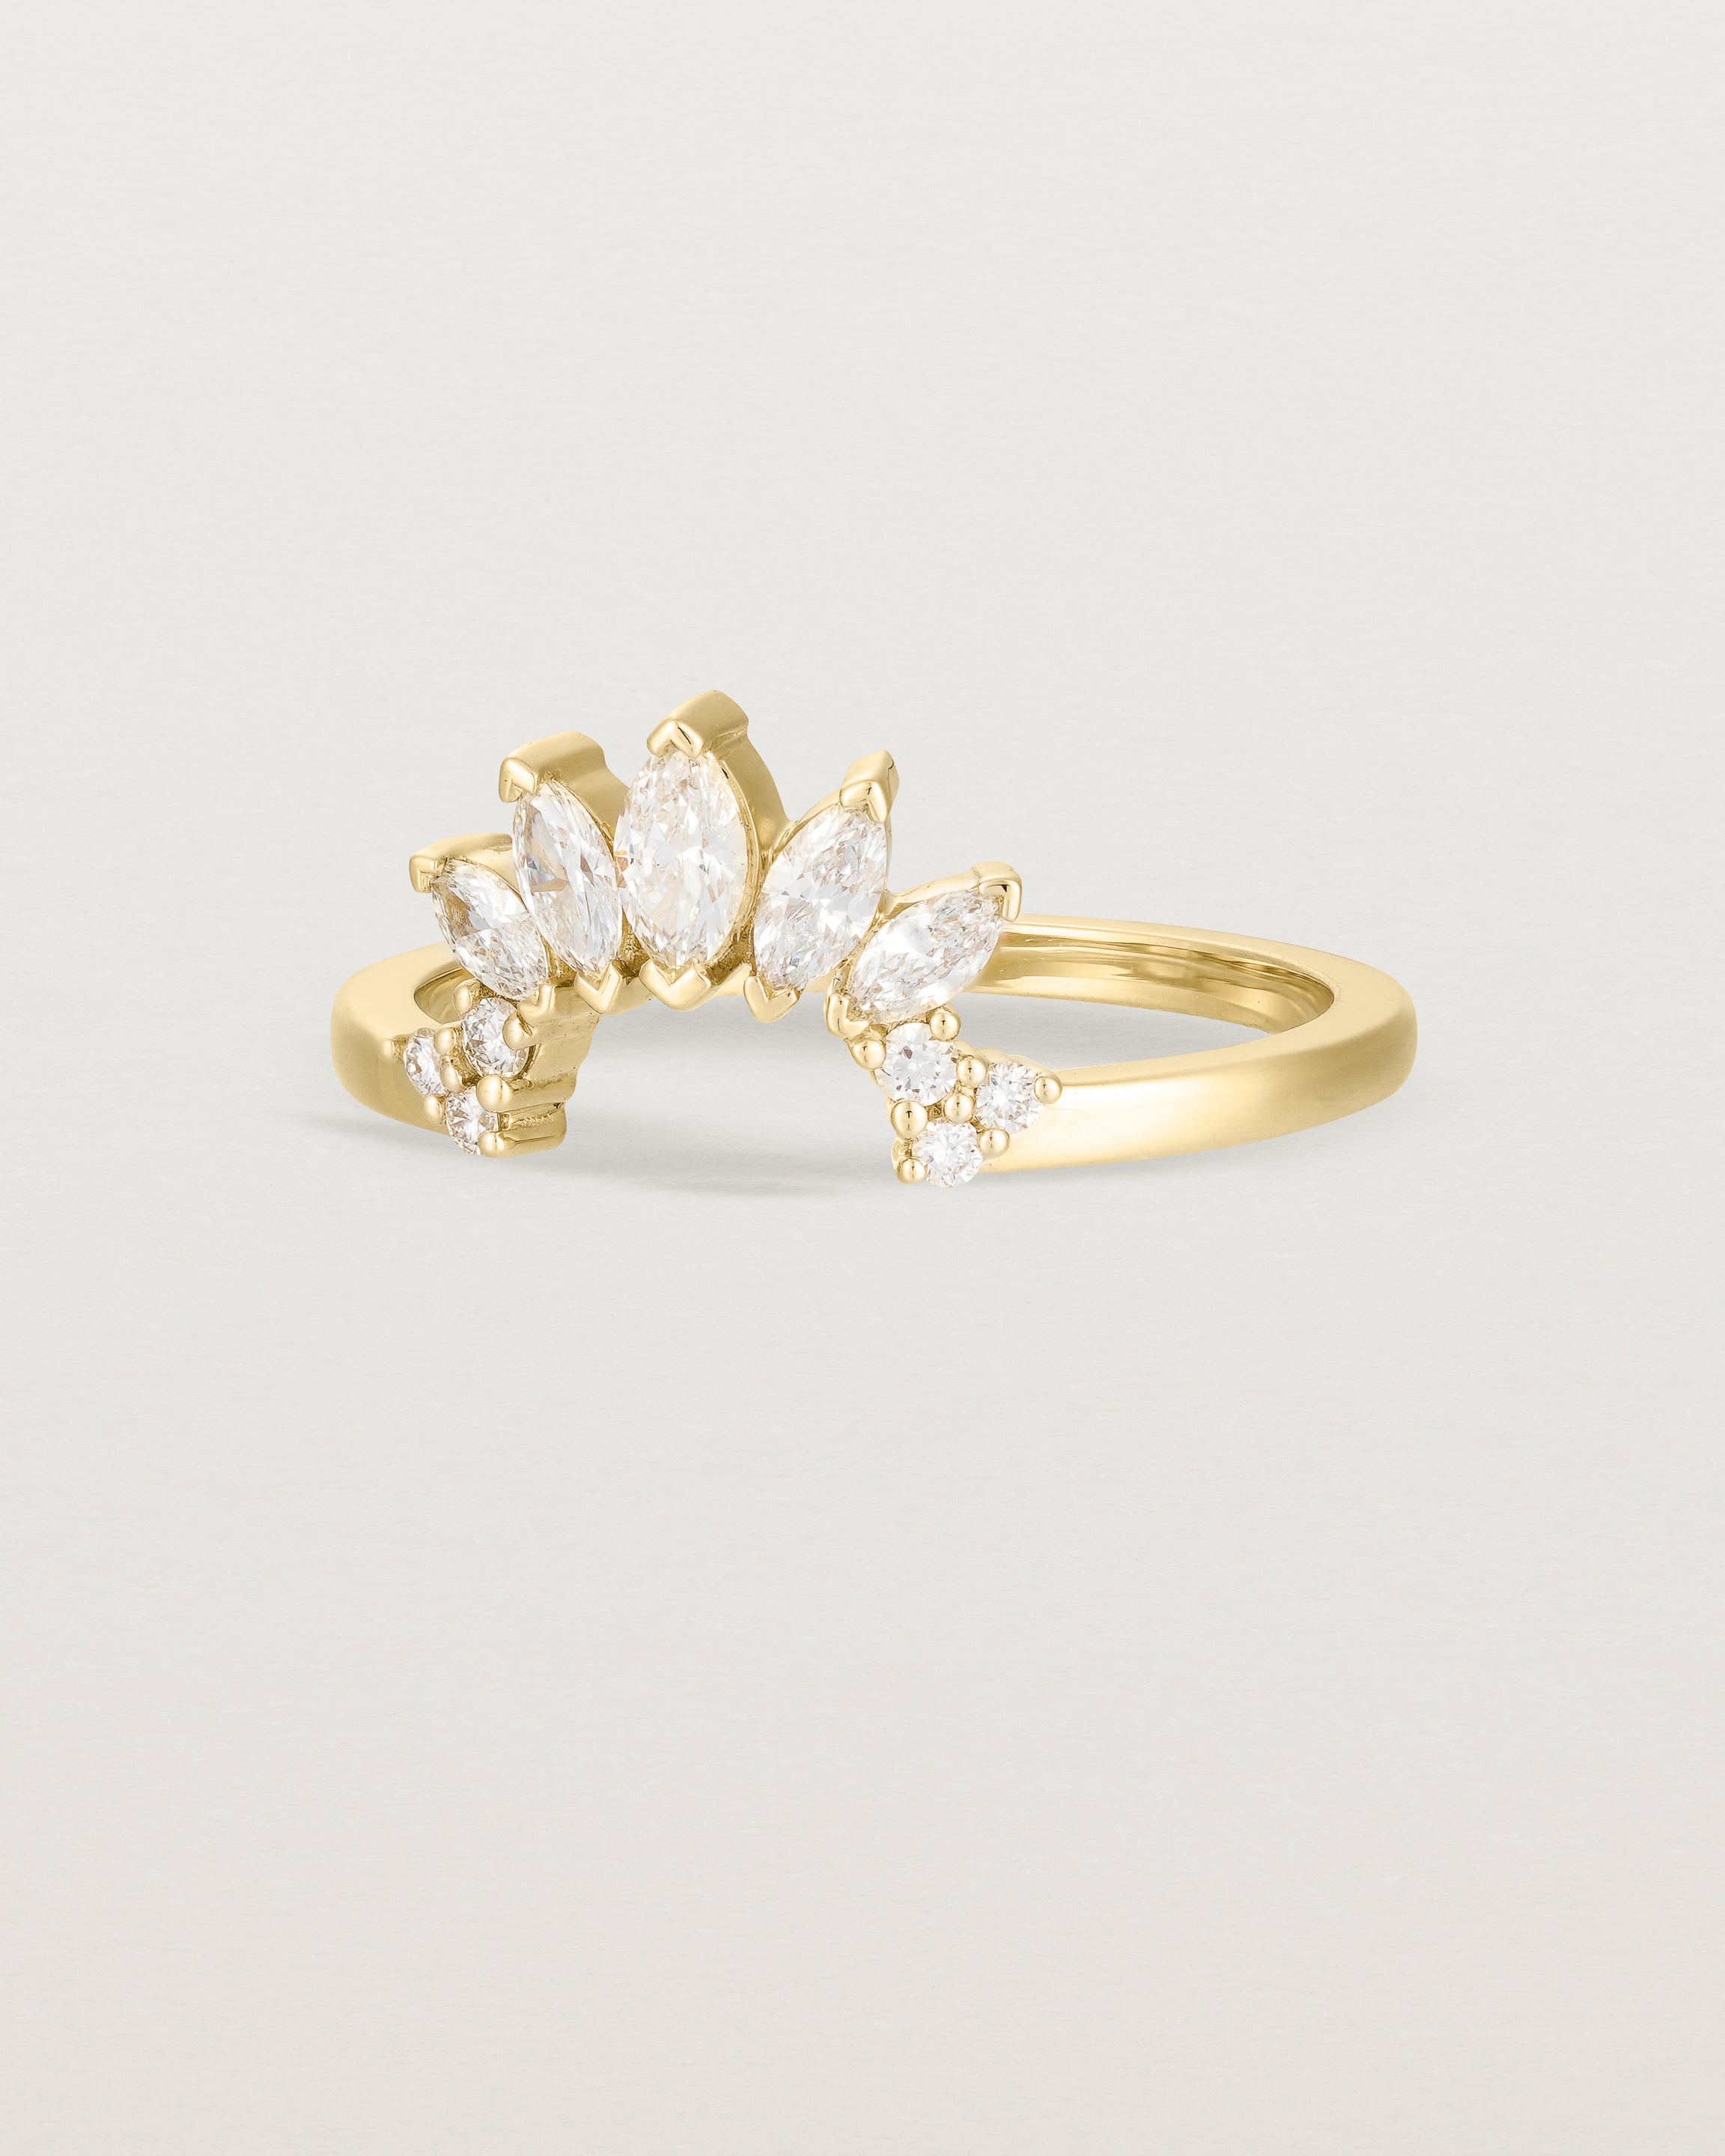 Fit two of a white diamond, sun-beam inspired crown ring crafted in yellow gold